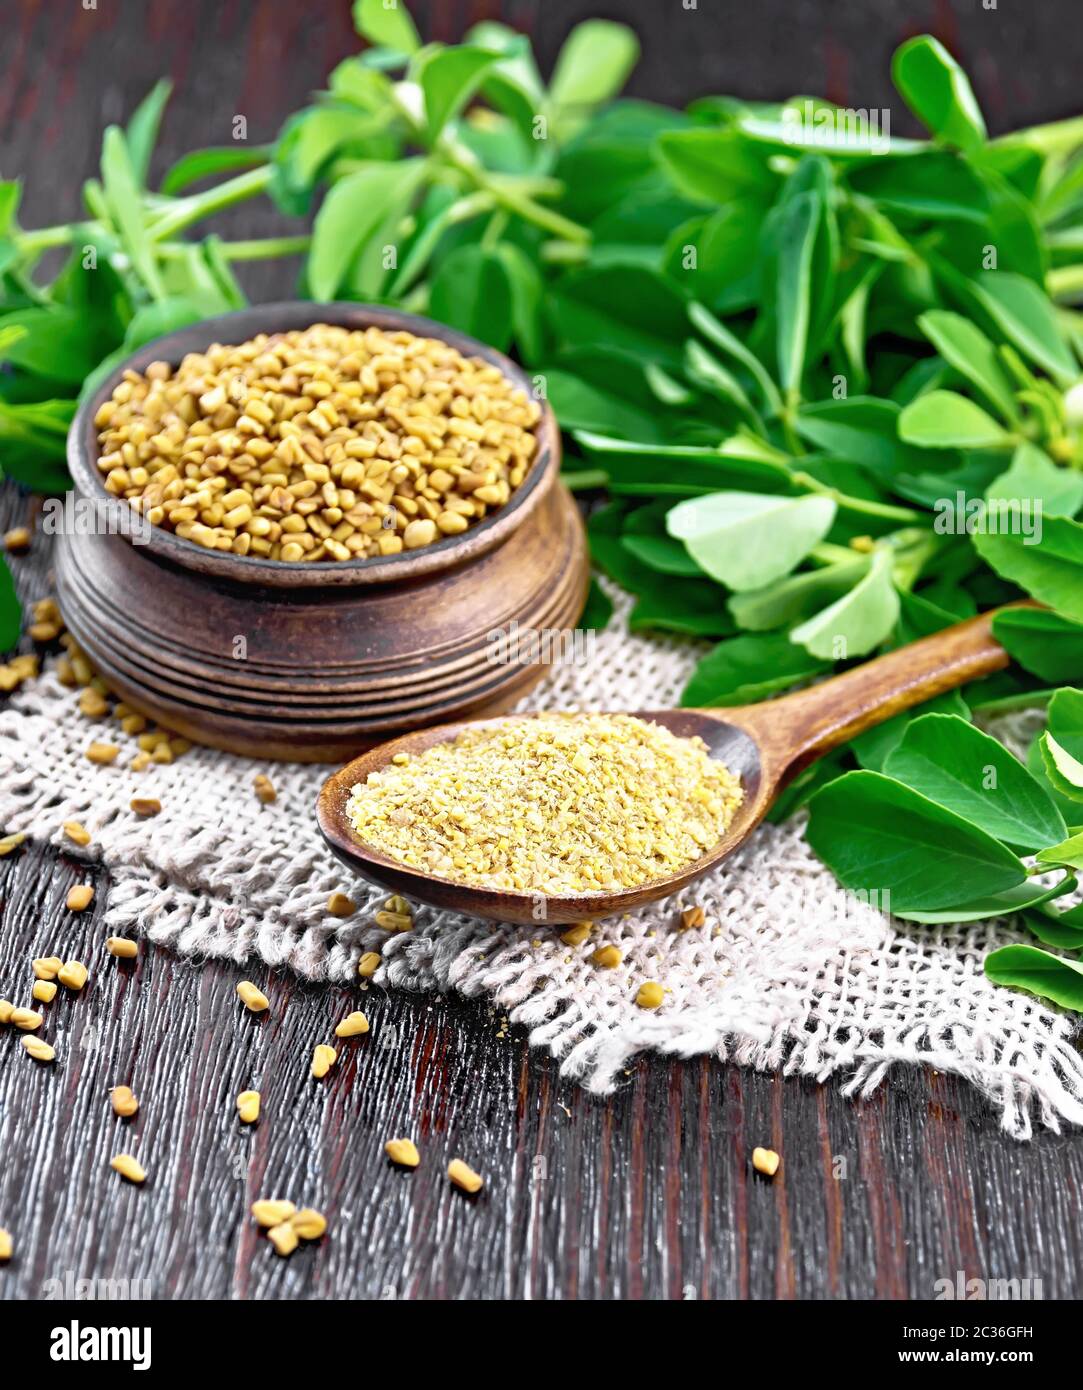 Ground fenugreek in a spoon and seeds in a bowl on burlap with green leaves on wooden board background Stock Photo